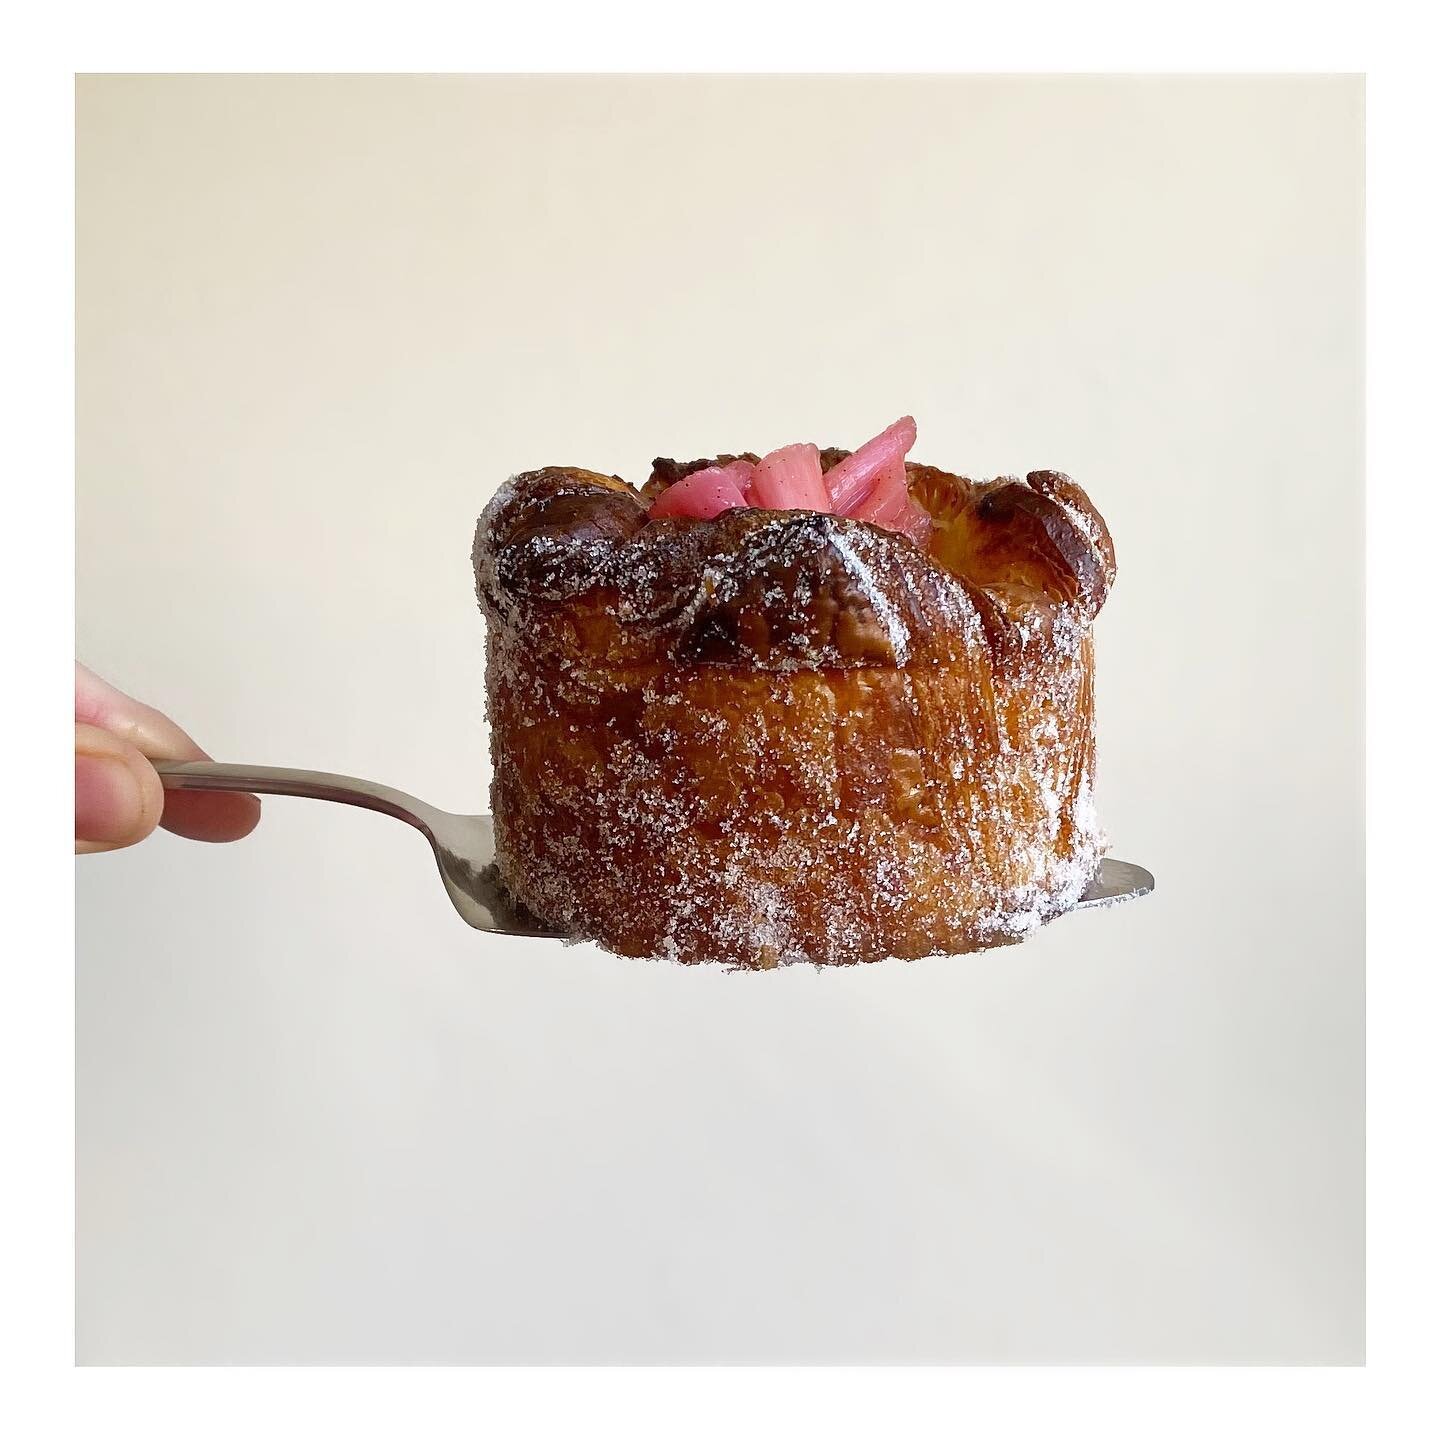 &bull; The Staple Kouign -Amann &bull; Filled with Vanilla Creme Pat &amp; Topped with Poached Rhubarb &bull; 
.
.
.
.
#staple 
#bakerycafe 
#kouignamann 
#broadstairs #westgateonsea #margate #ramsgate #thanet 
Made in house by @stevogadd &amp; @mike